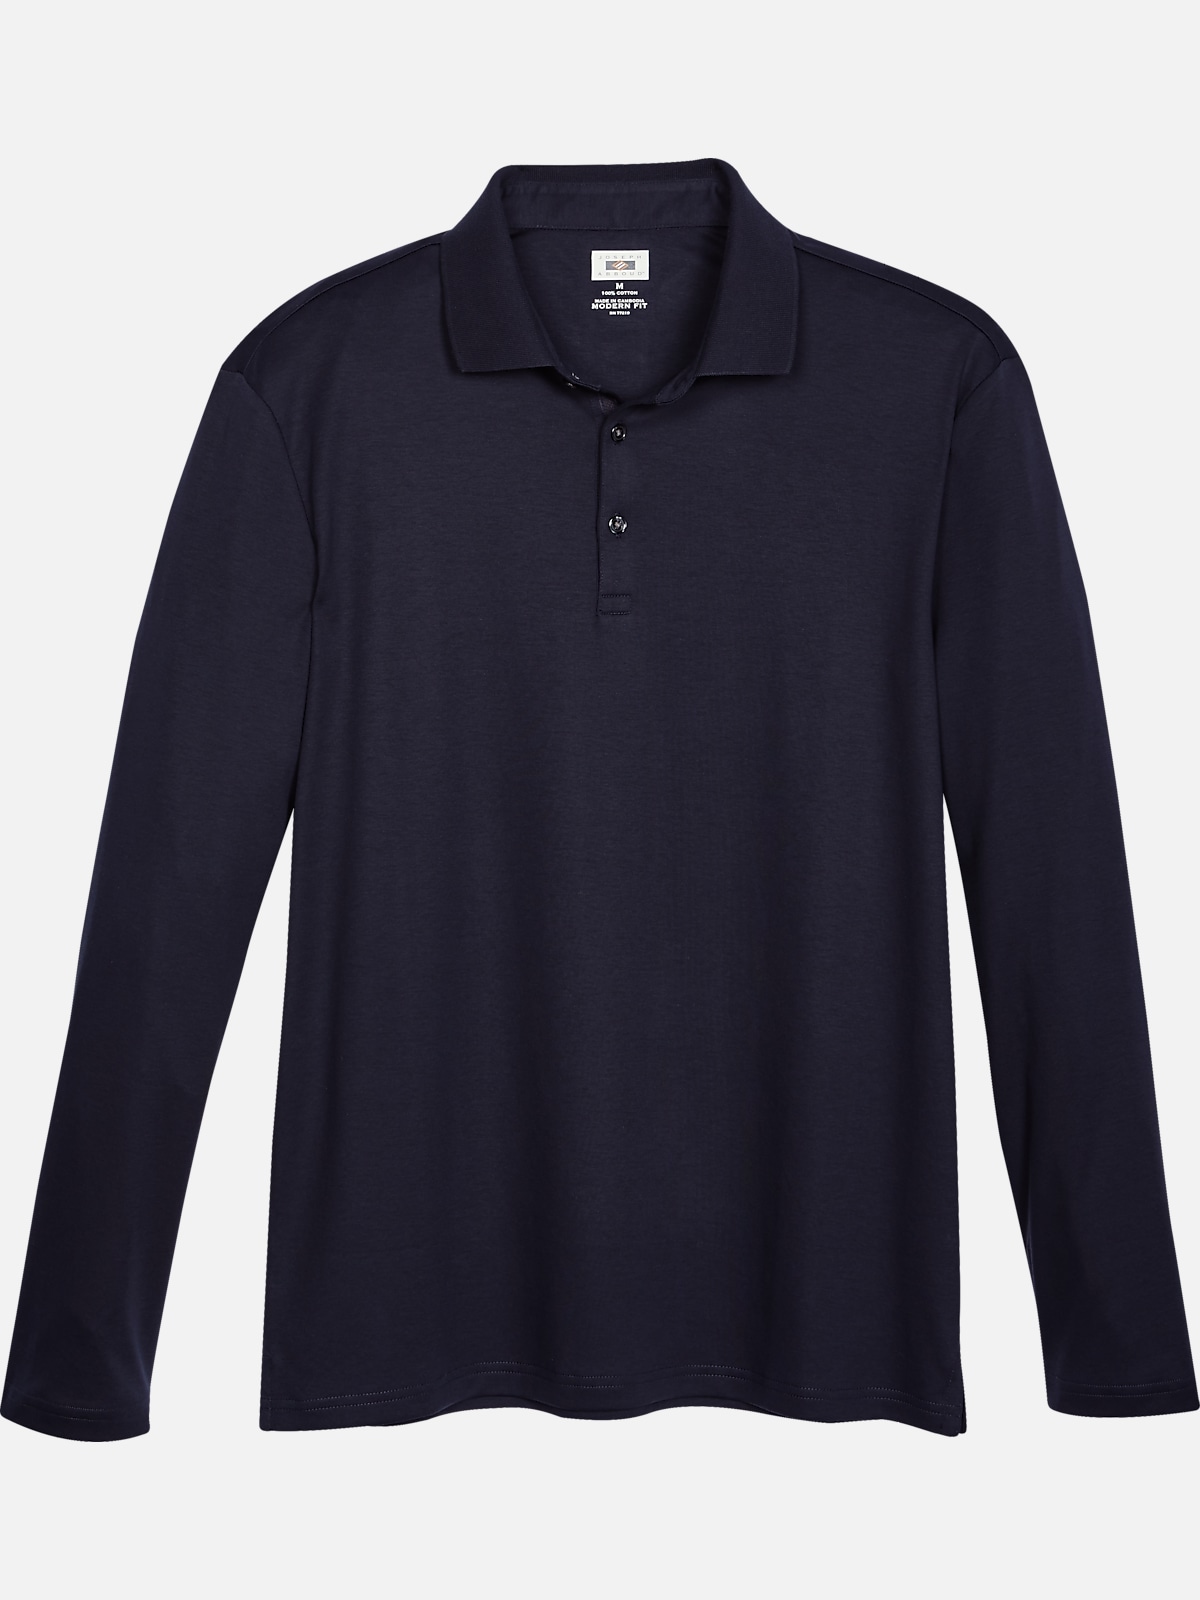 Joseph Abboud Modern Fit Luxe Cotton Long Sleeve Polo | New Arrivals ...